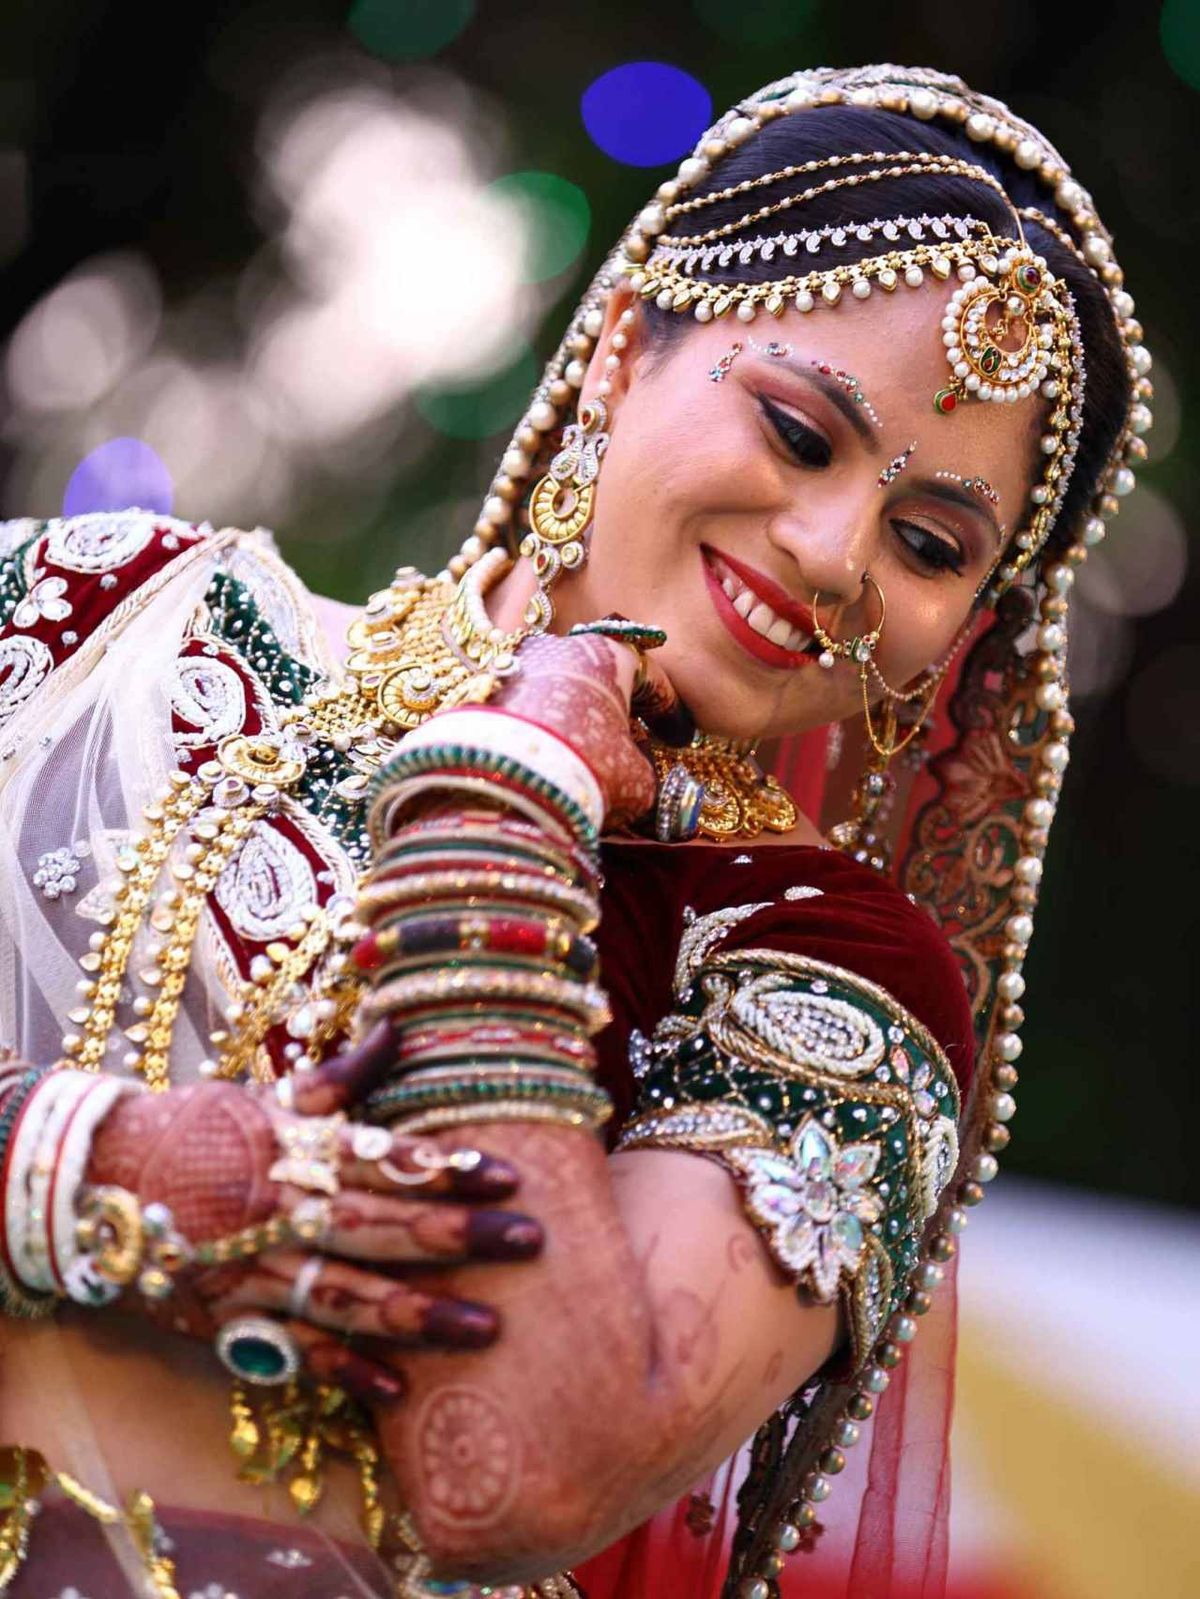 Being An Indian-American Means You're Breaking One Or Both Societies' Beauty Standards